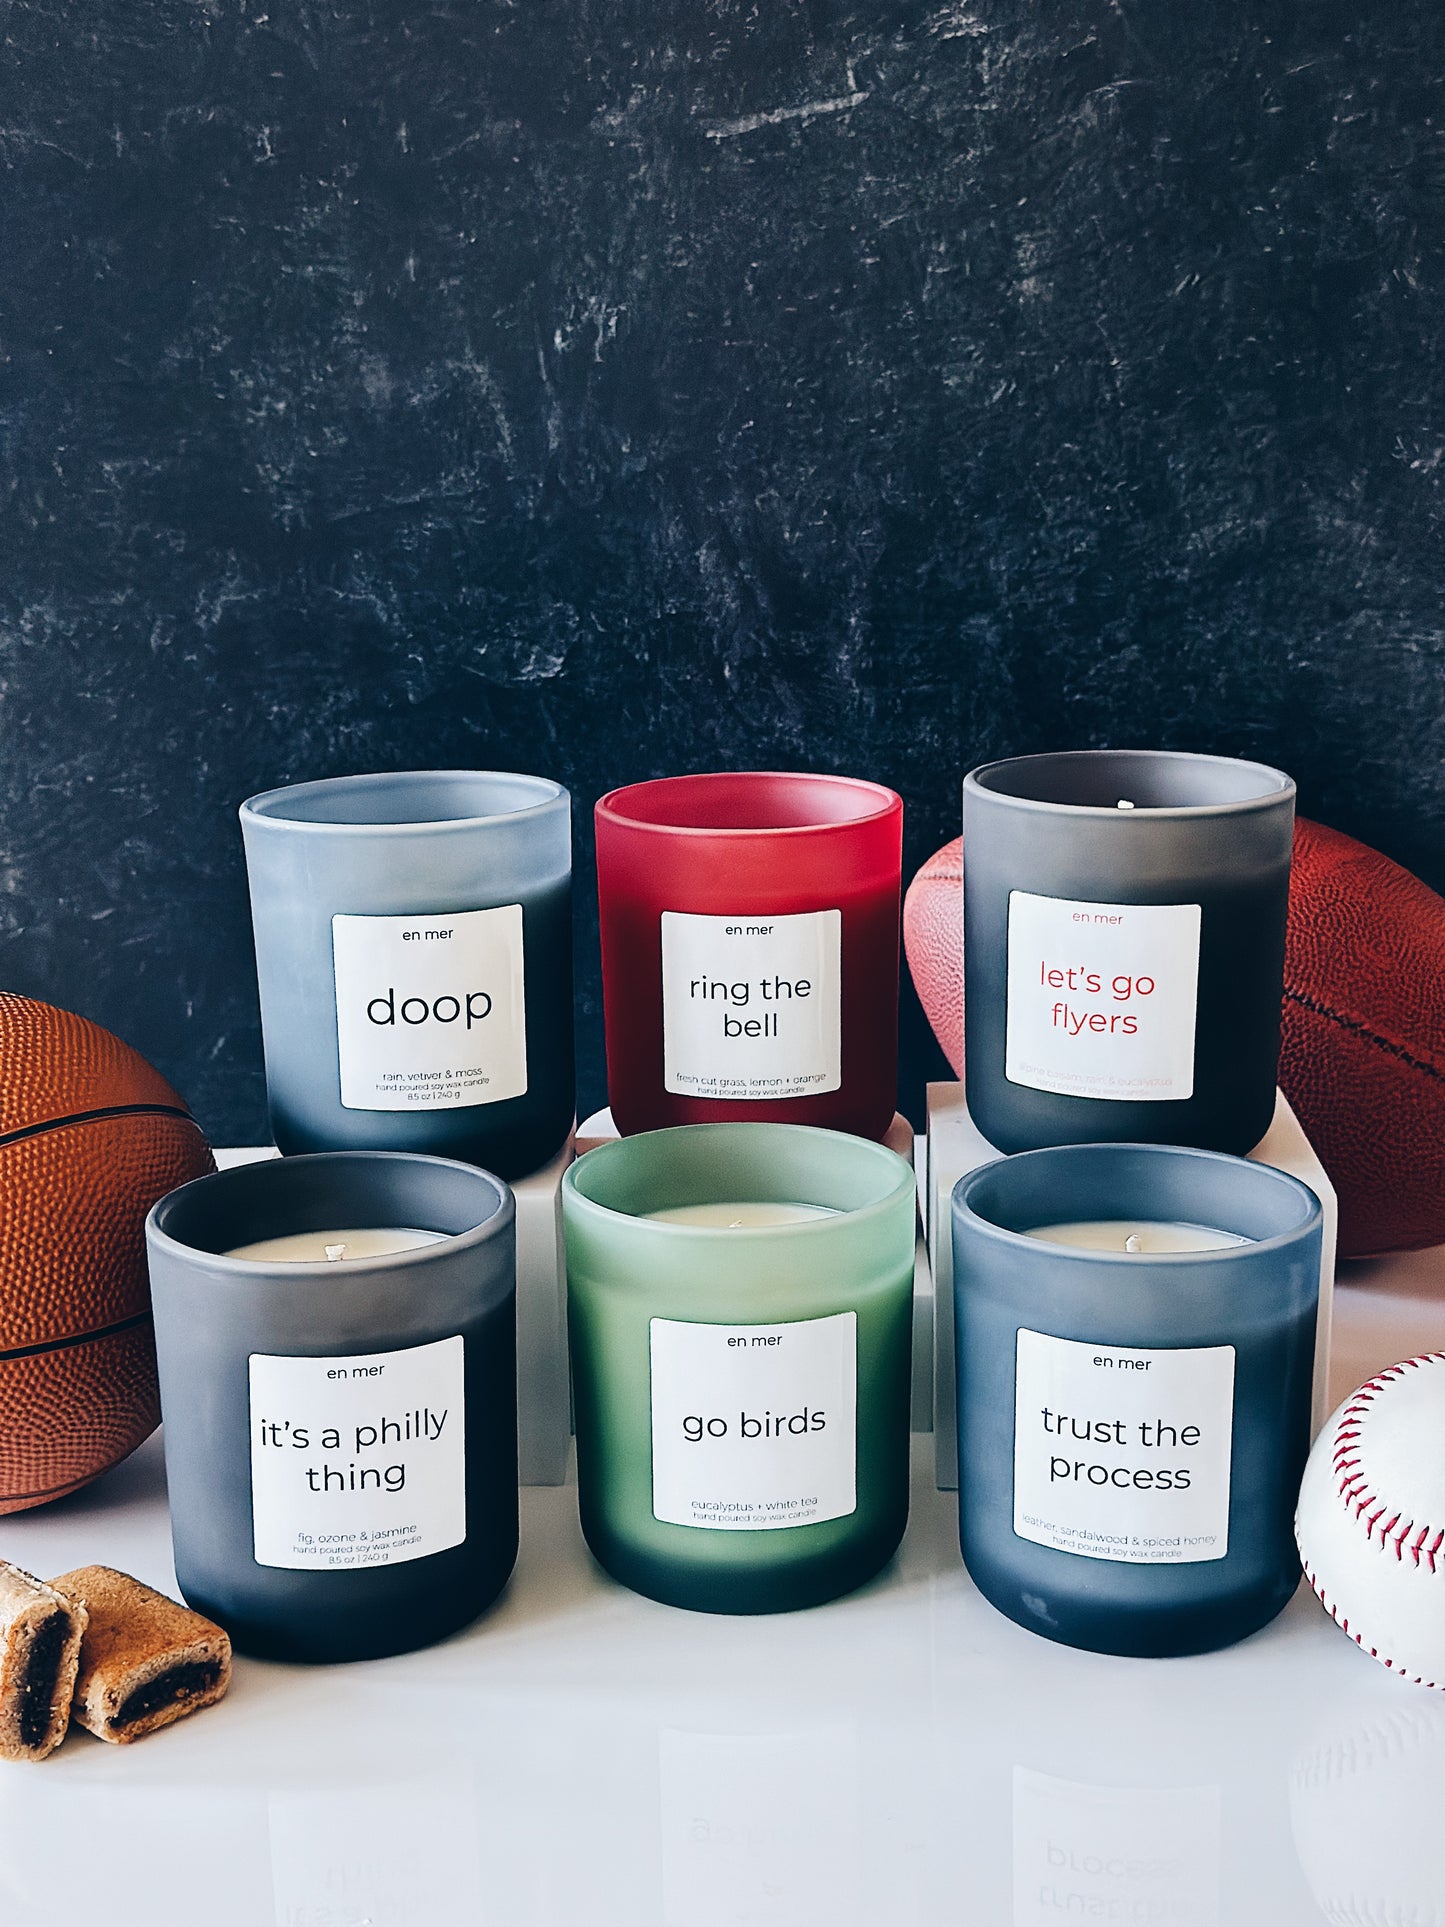 en mer | trust the process | soy wax candle